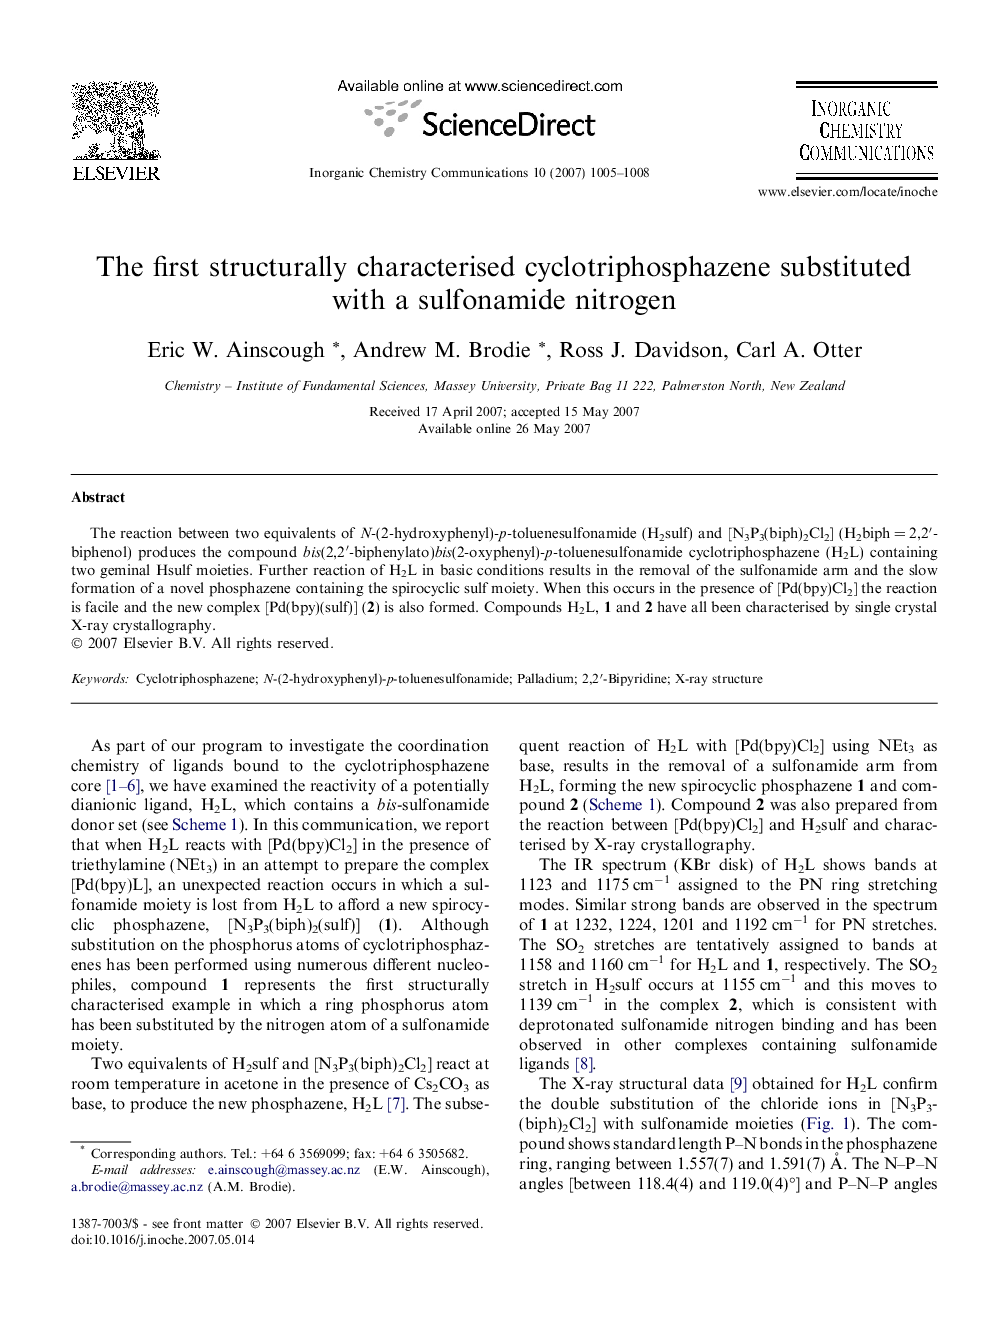 The first structurally characterised cyclotriphosphazene substituted with a sulfonamide nitrogen